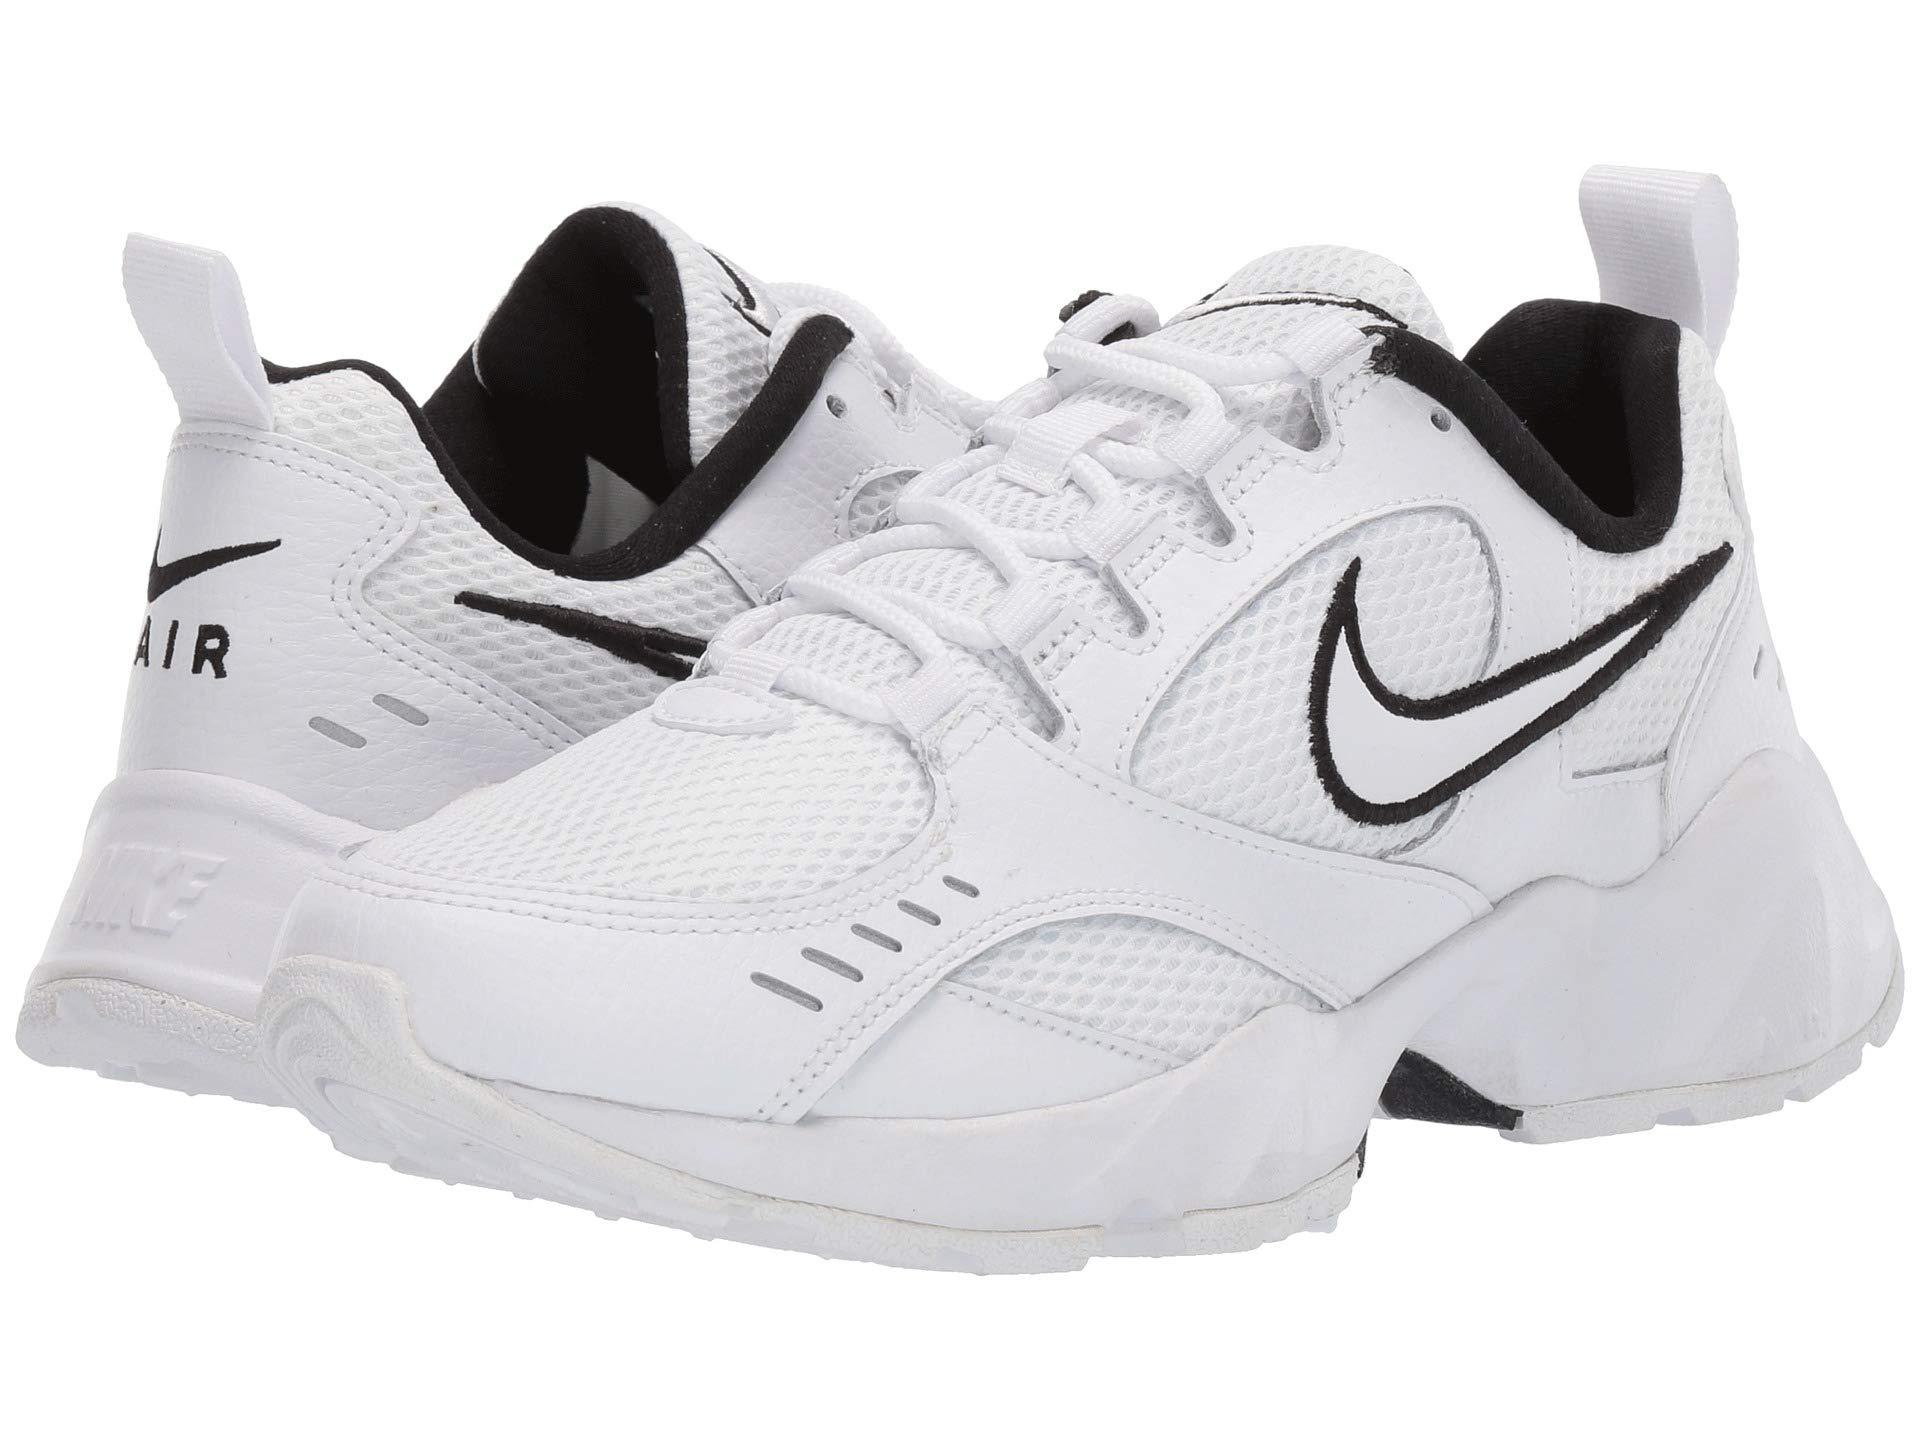 Nike Air Heights in White